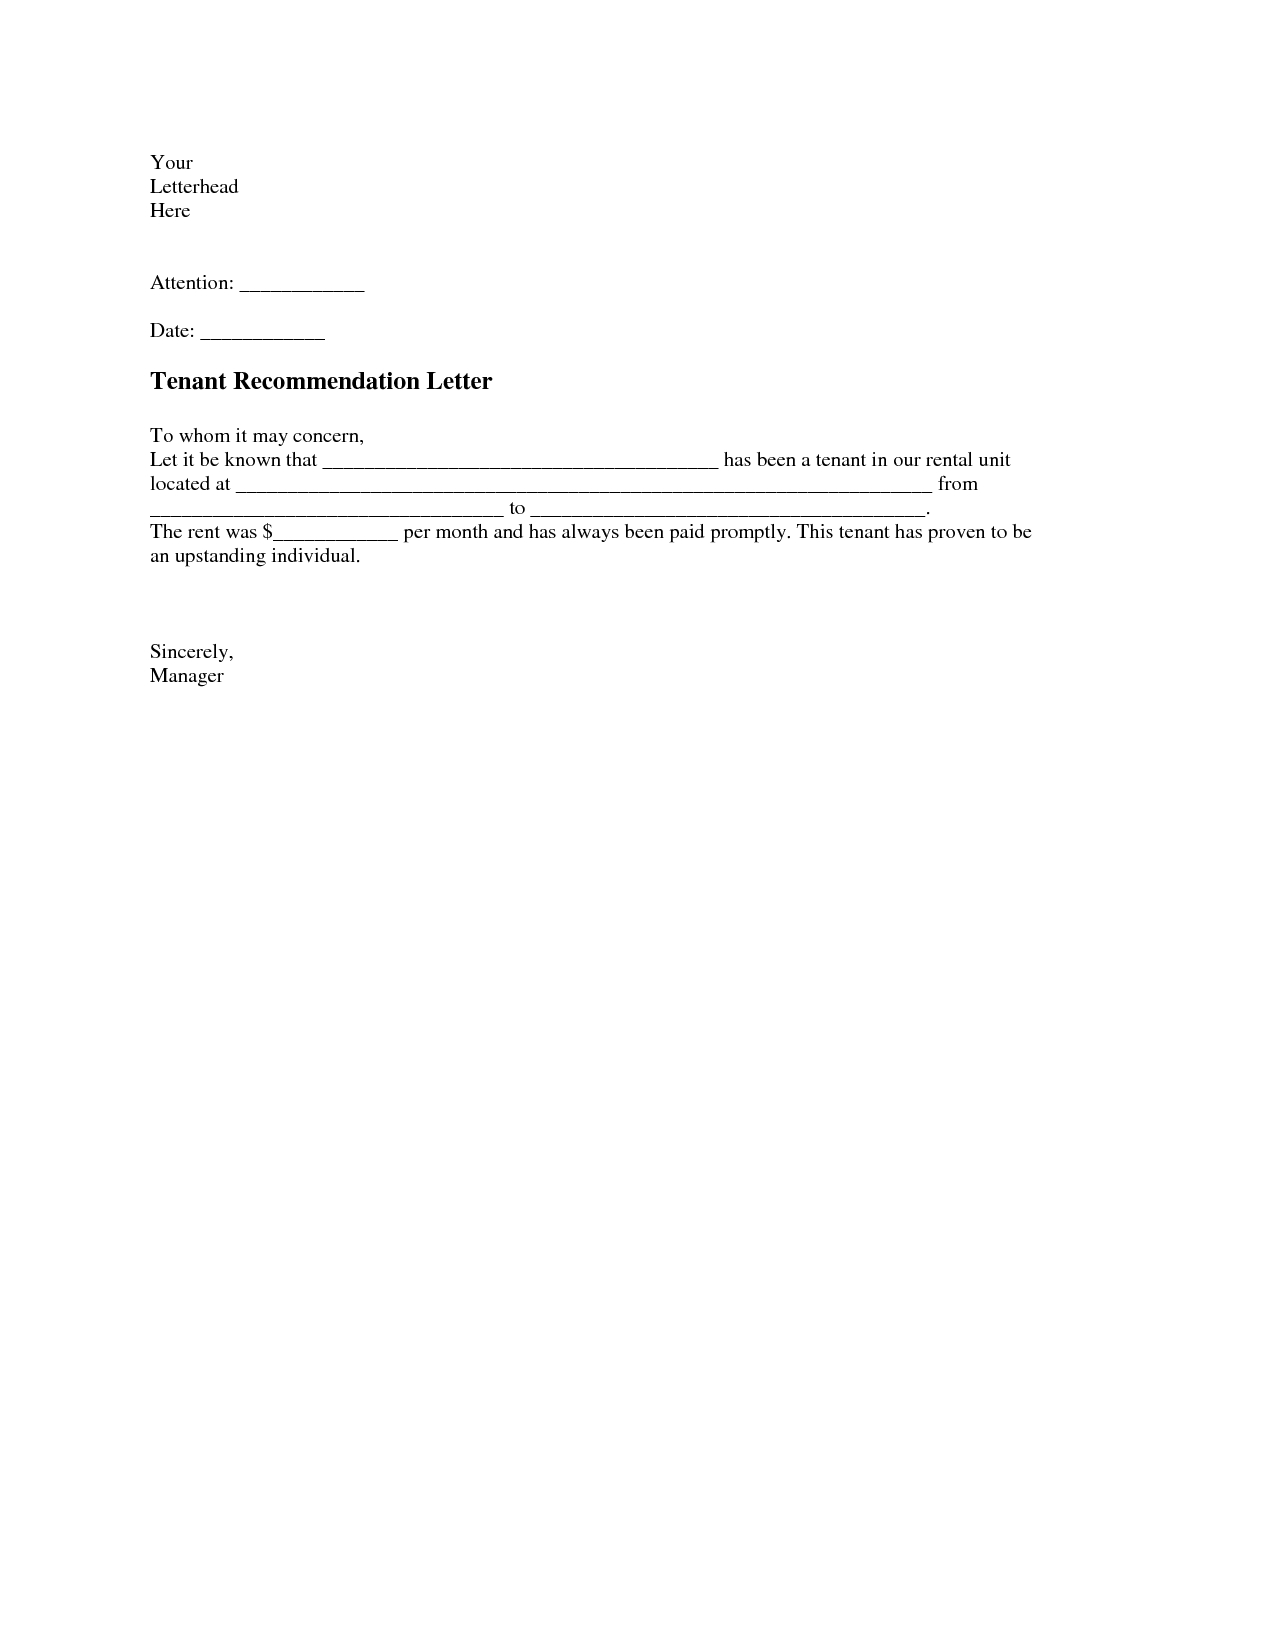 Sample Recommendation Letter For Tenant Akali in proportions 1275 X 1650